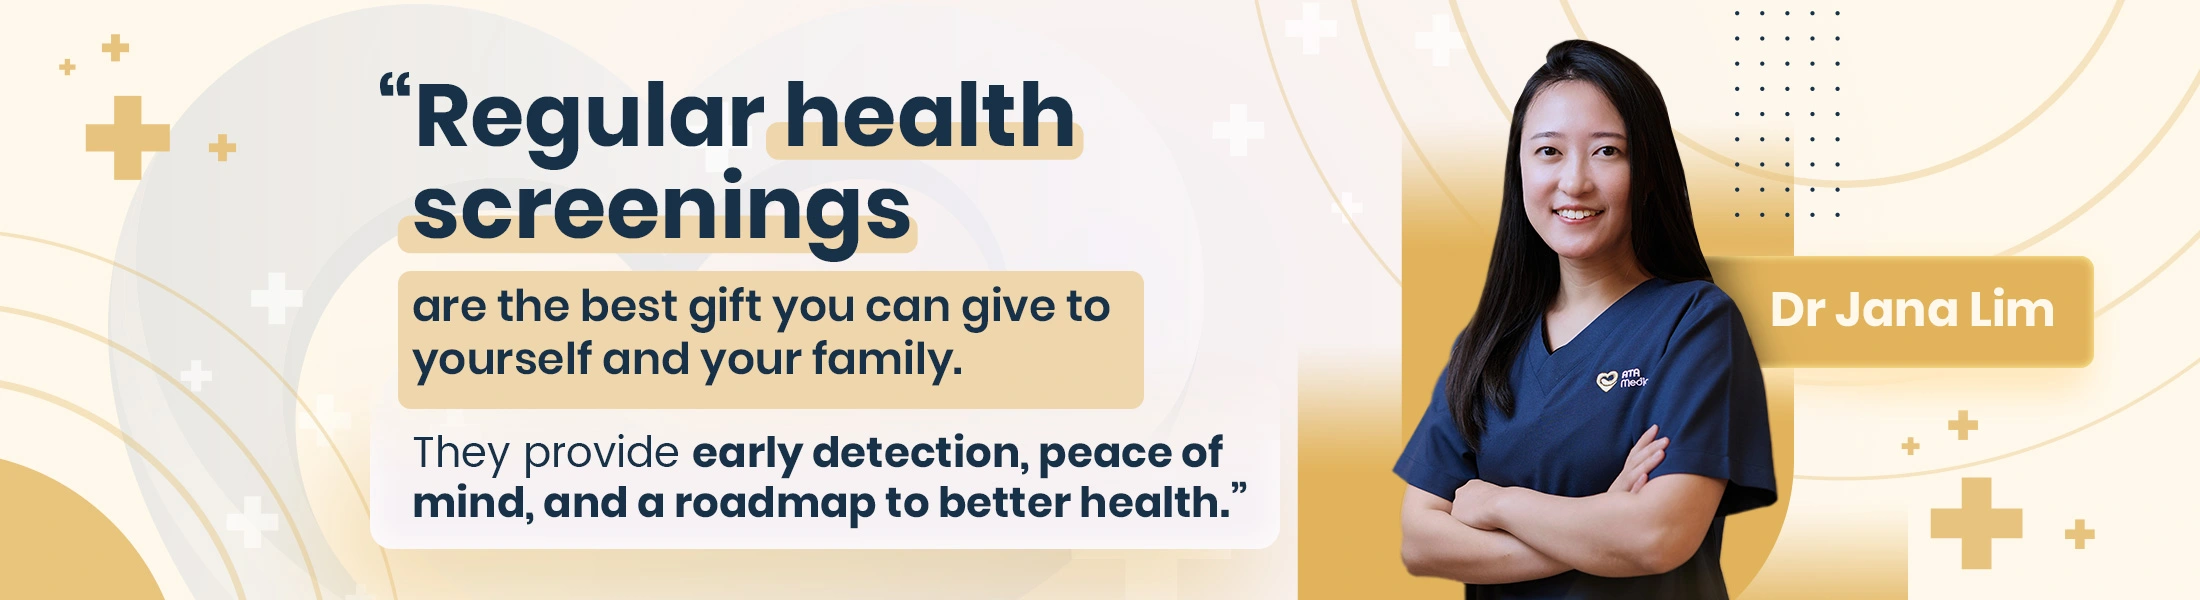 Dr Jana Lim: Regular health screenings are the best gift you can give to yourself and your family. They provide early detection, peace of mind, and a roadmap to better health.